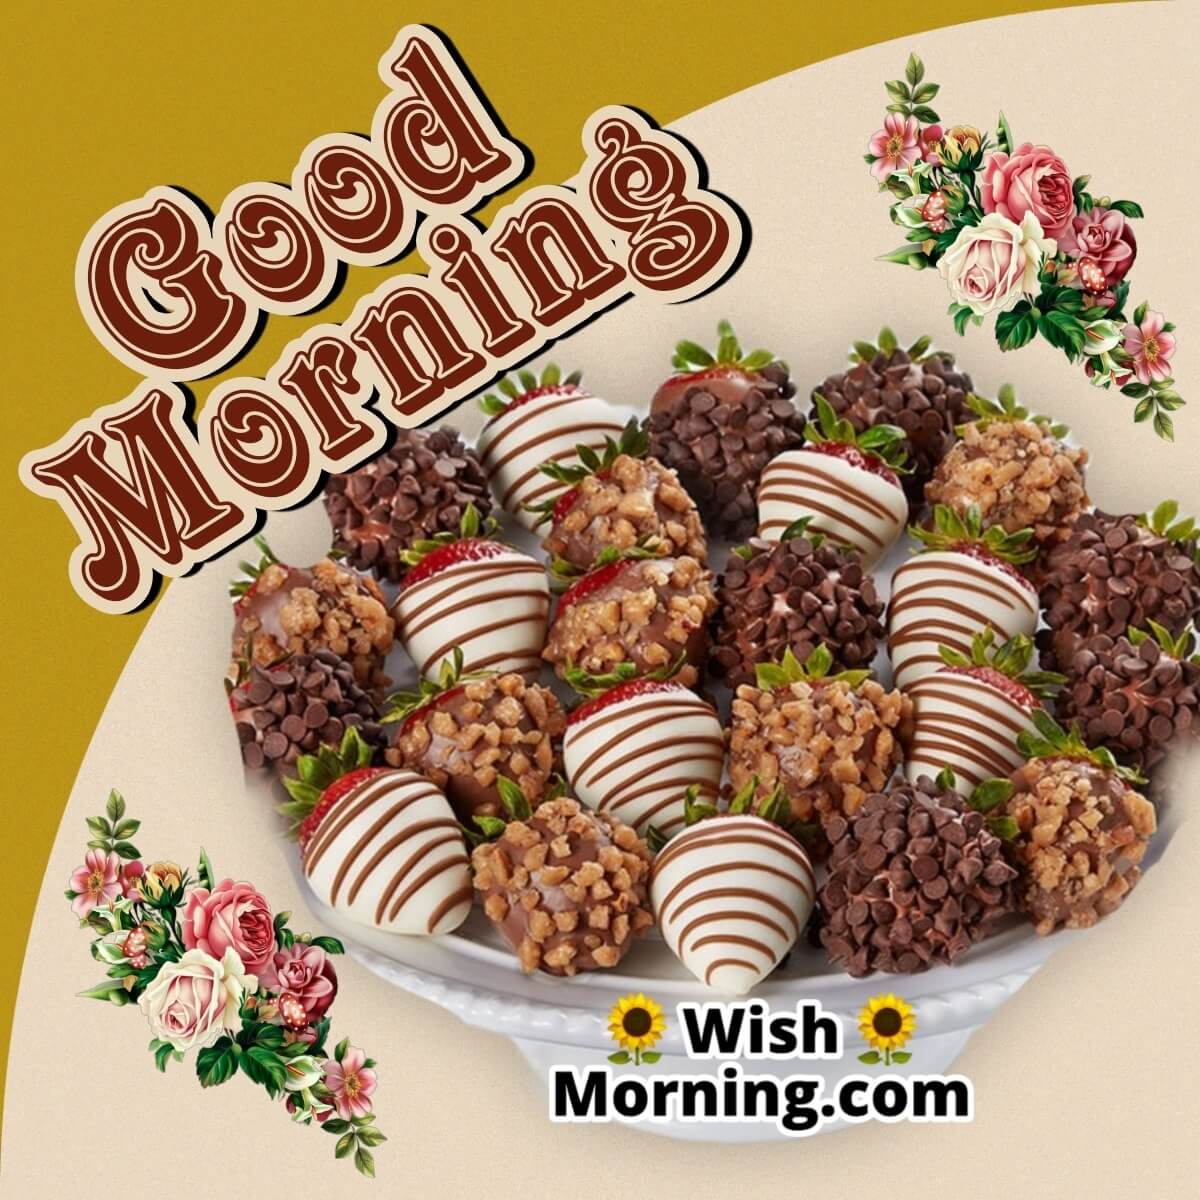 Good Morning Chocolate Images